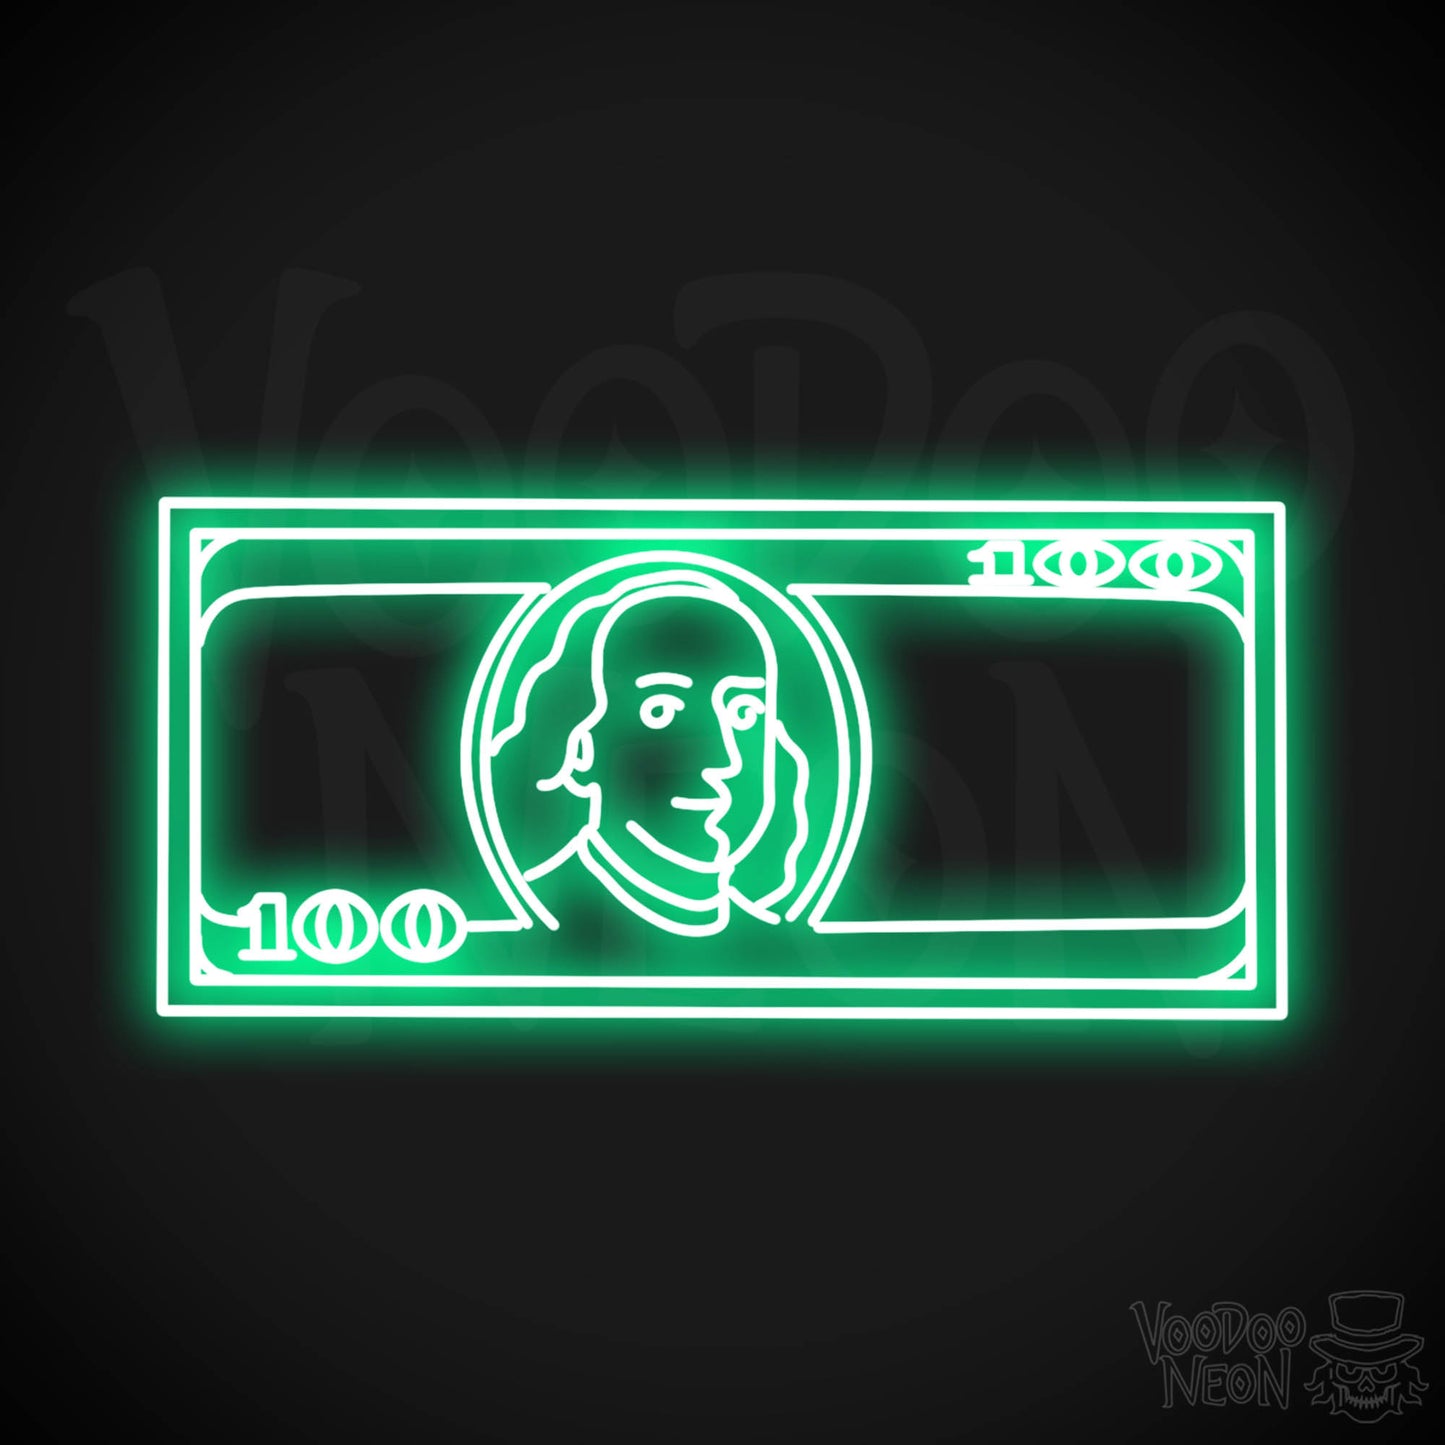 US $100 Bill Neon Sign - Neon $100 Sign - Color Green